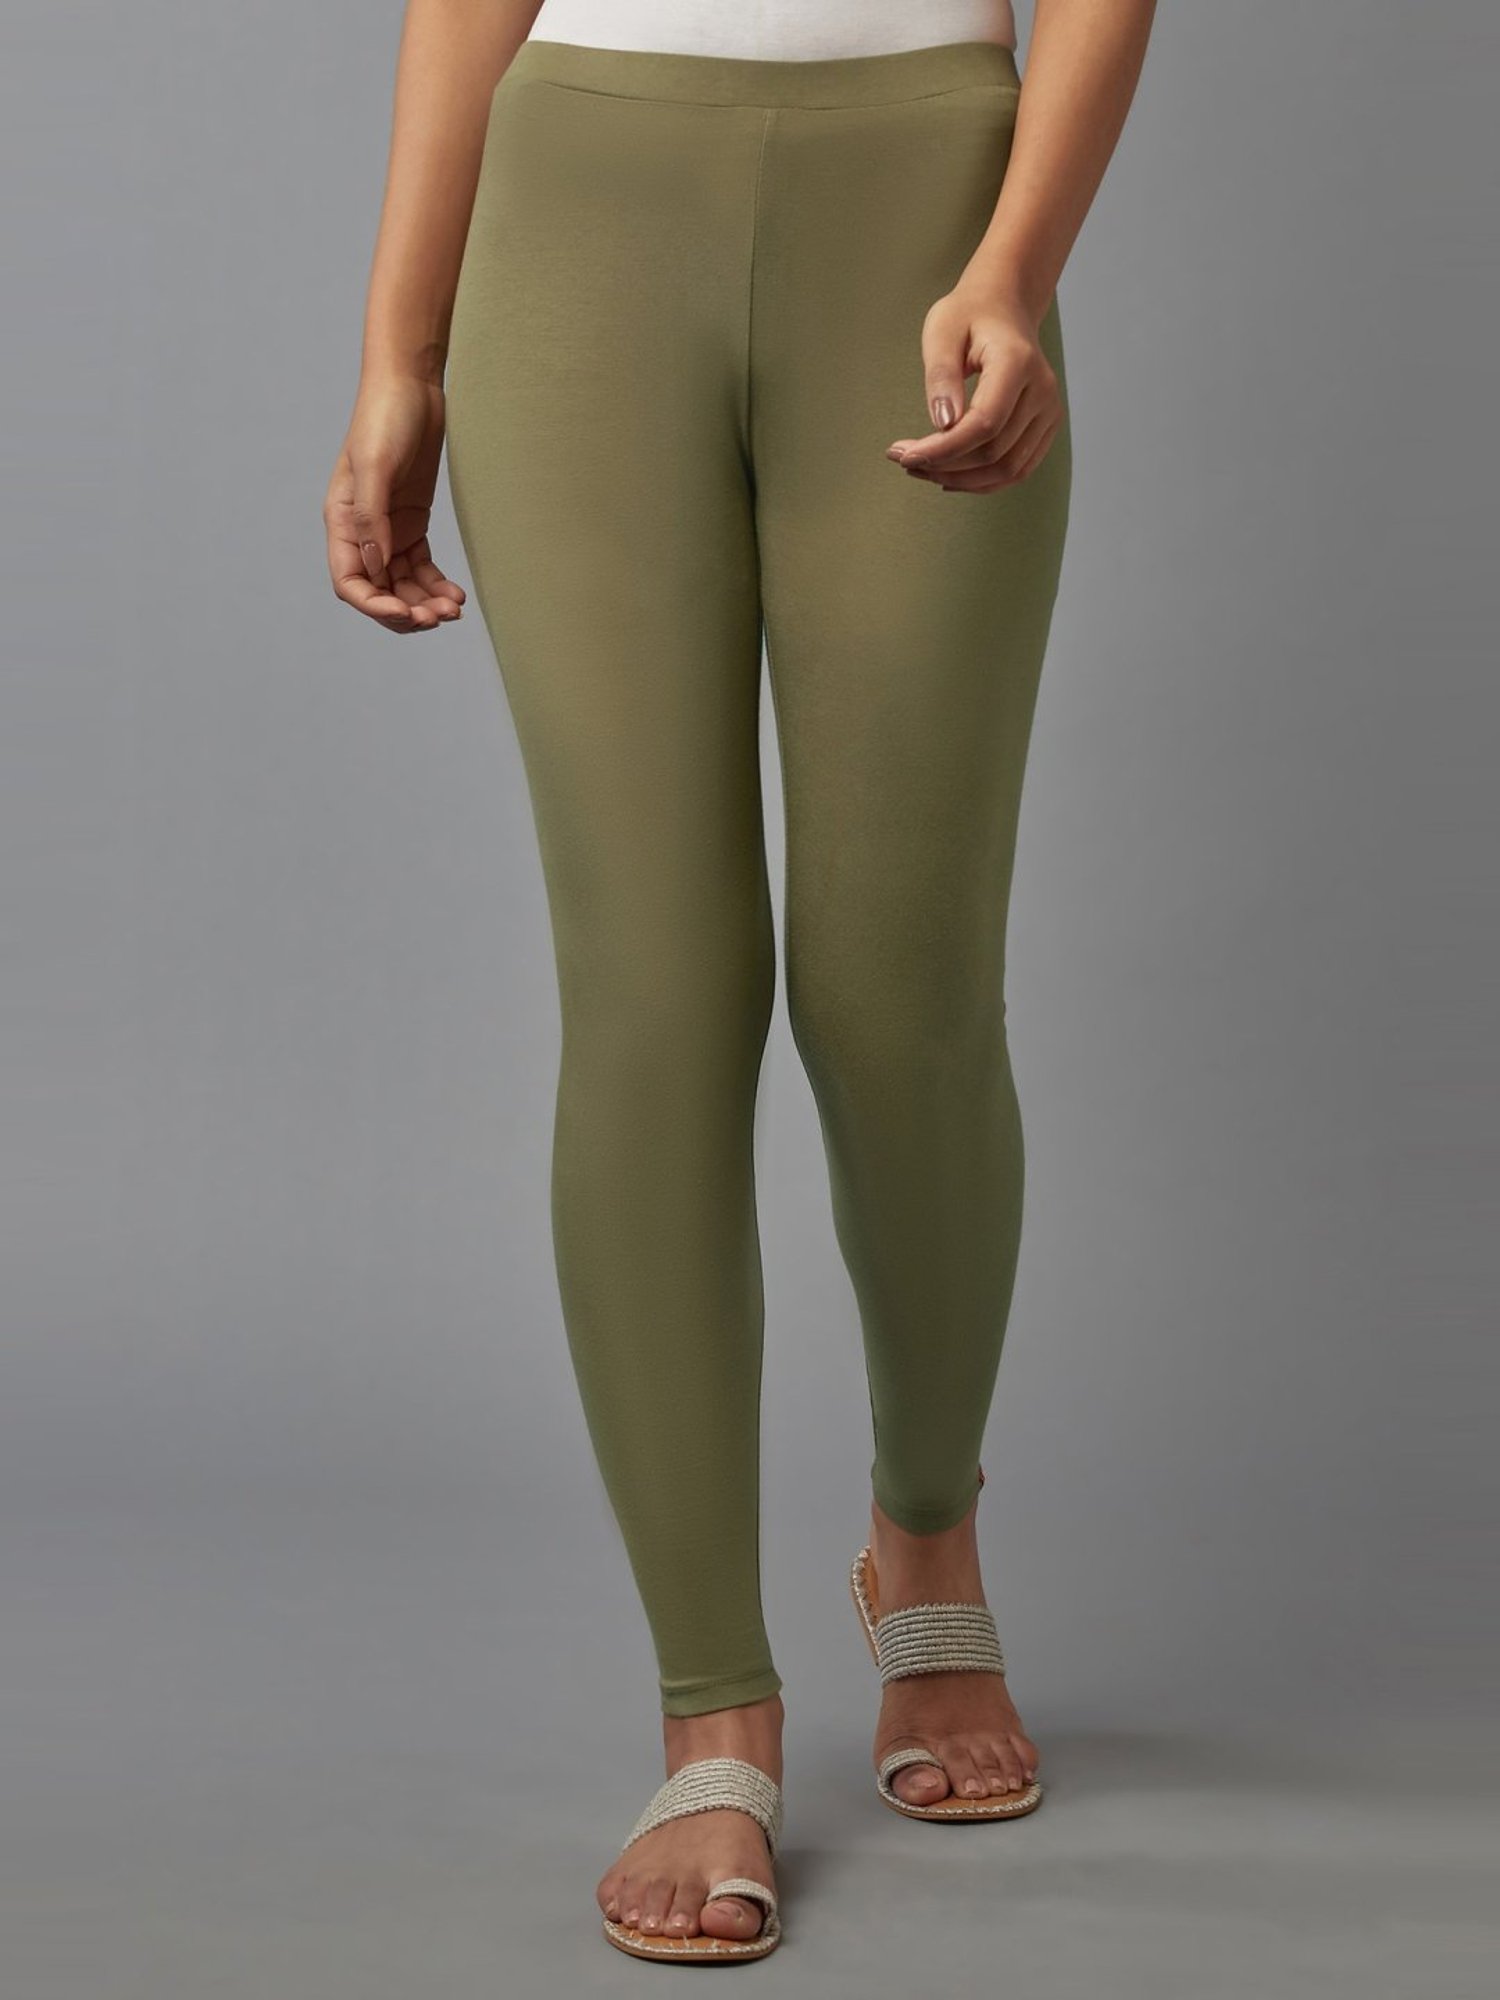 W Lime Green Regular Fit Tights